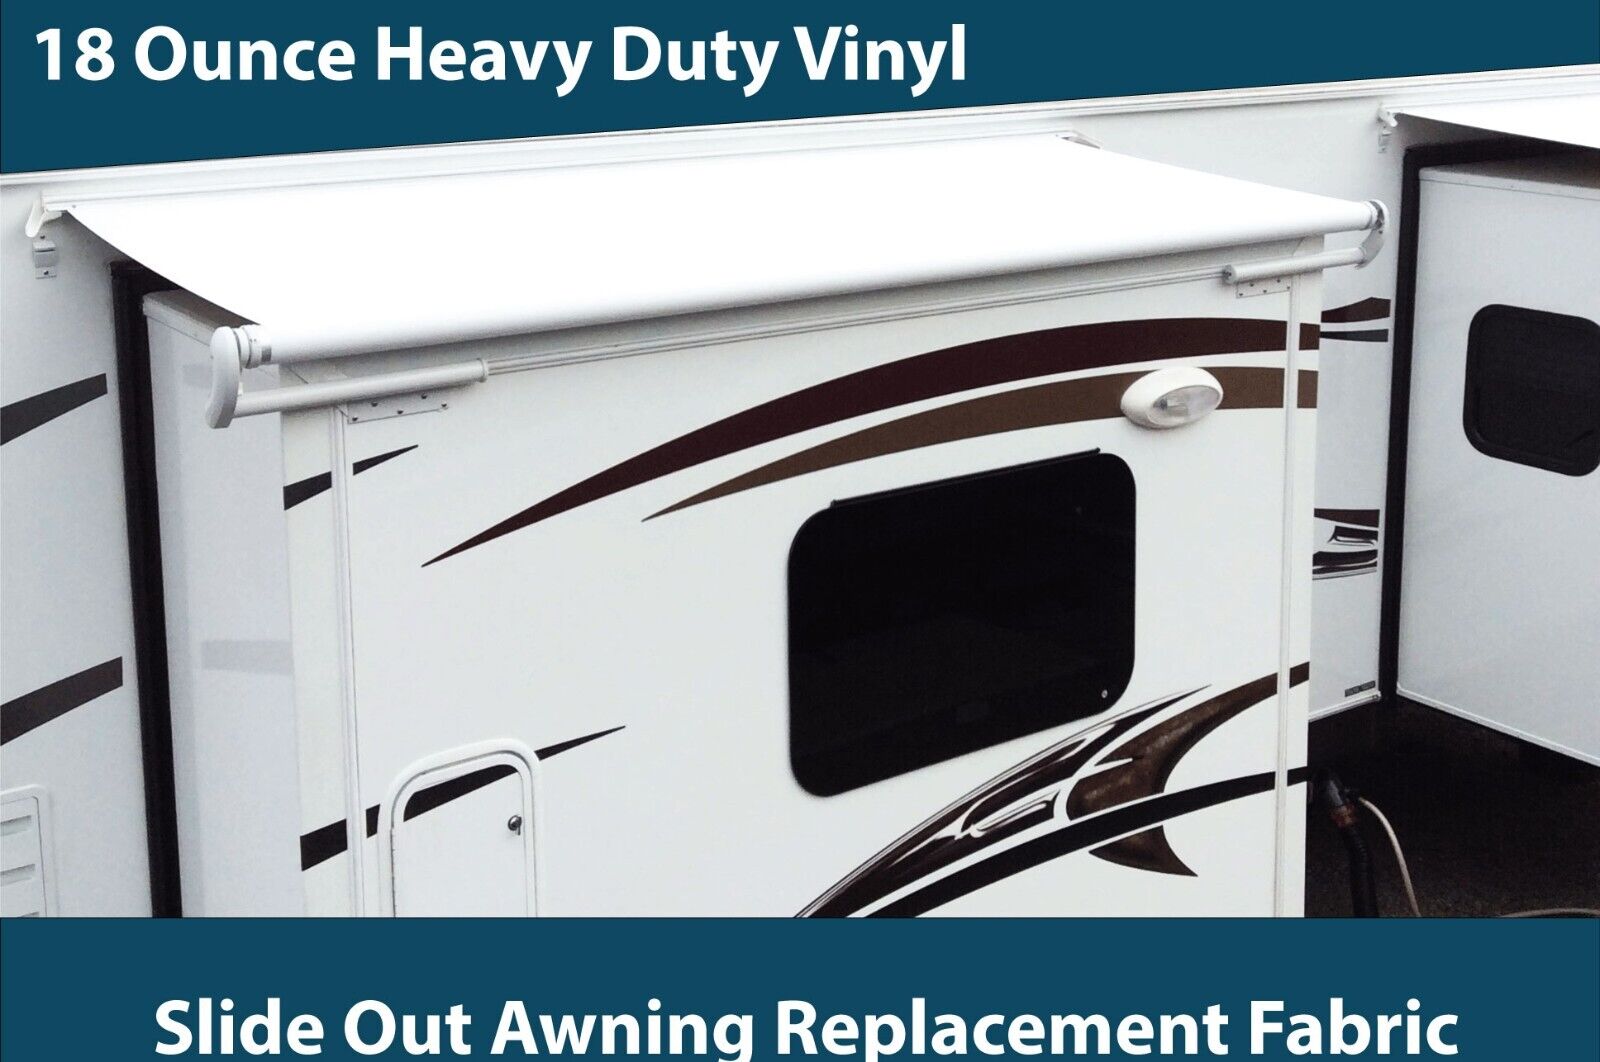 RV Slide Out Awning Replacement Fabric White- 5 Year Warranty Choose Size